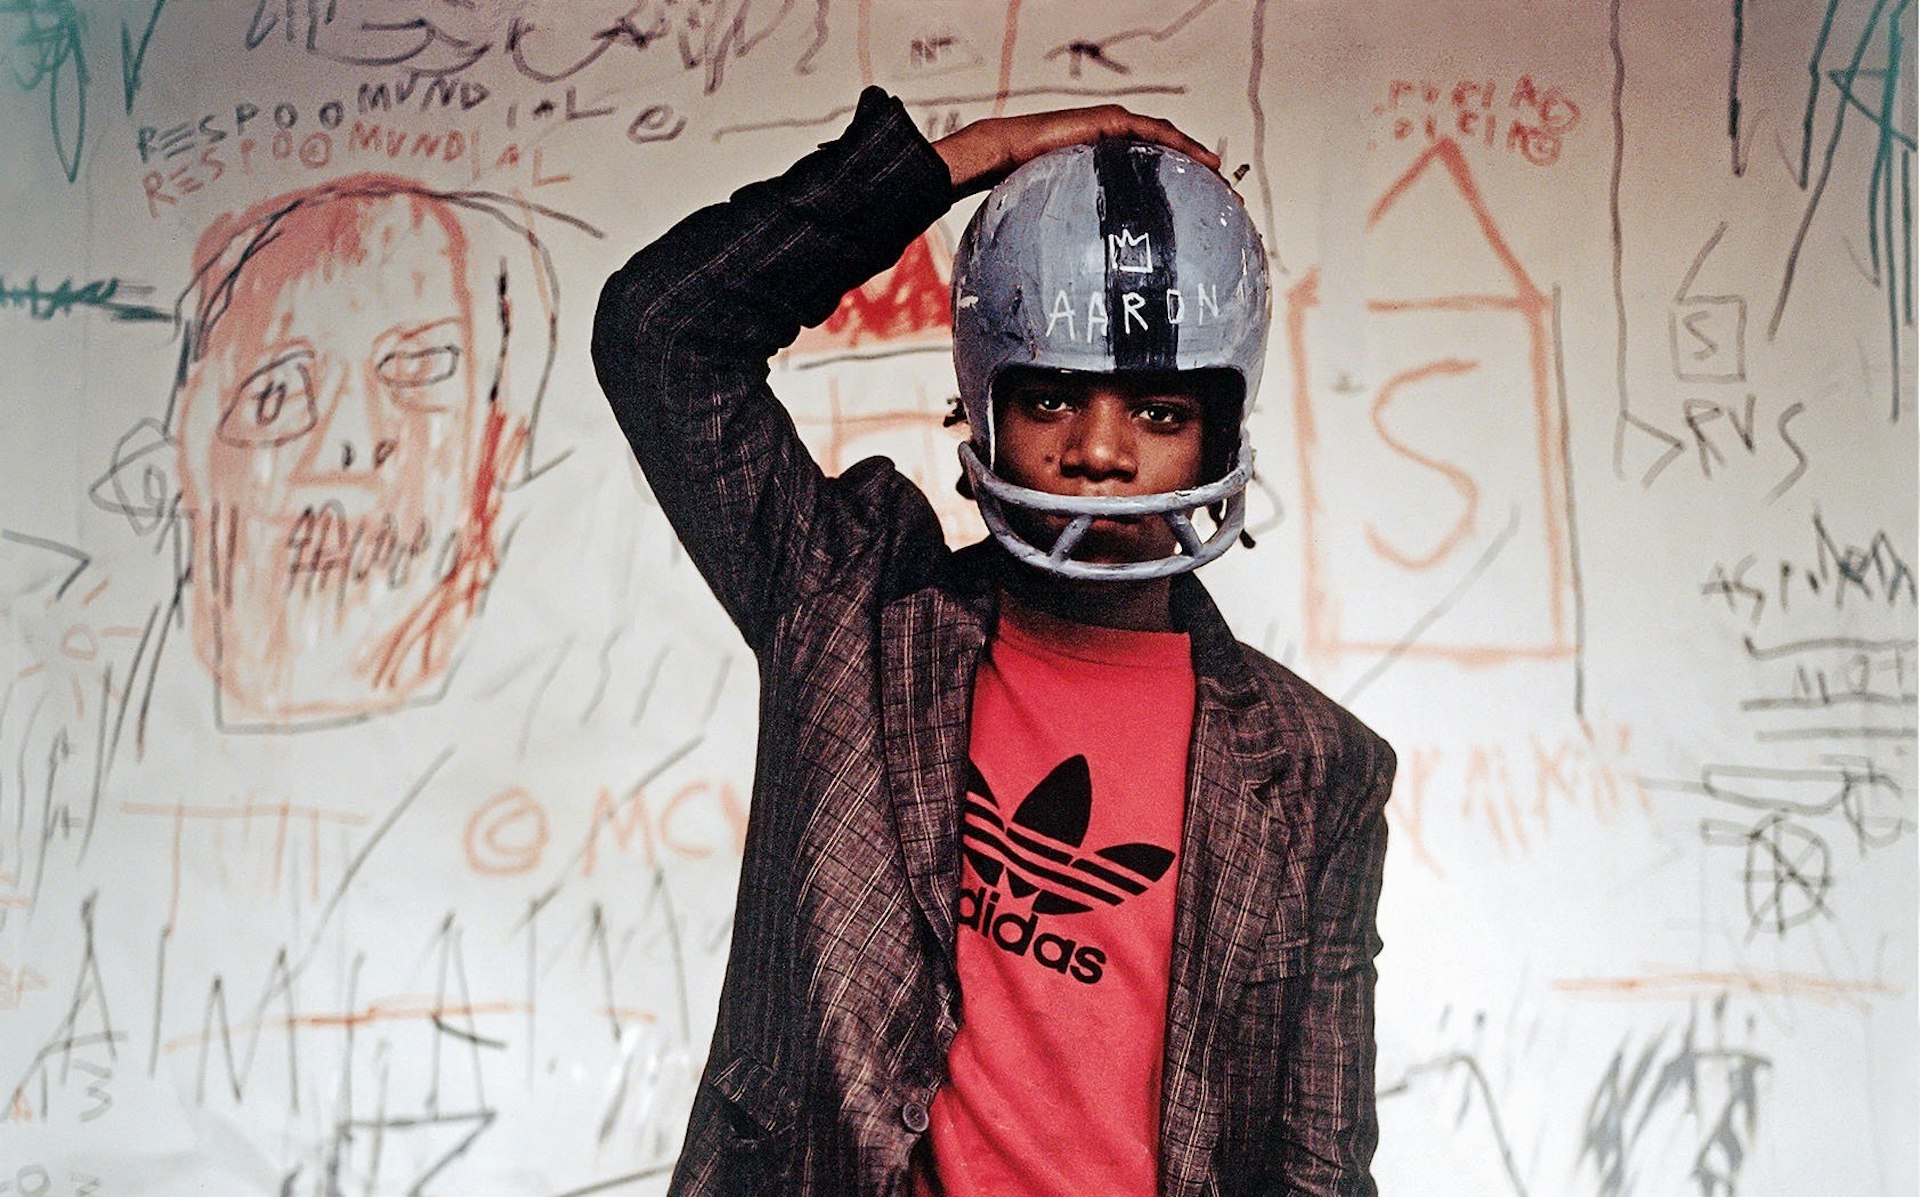 The UK’s first major Basquiat exhibition opens today